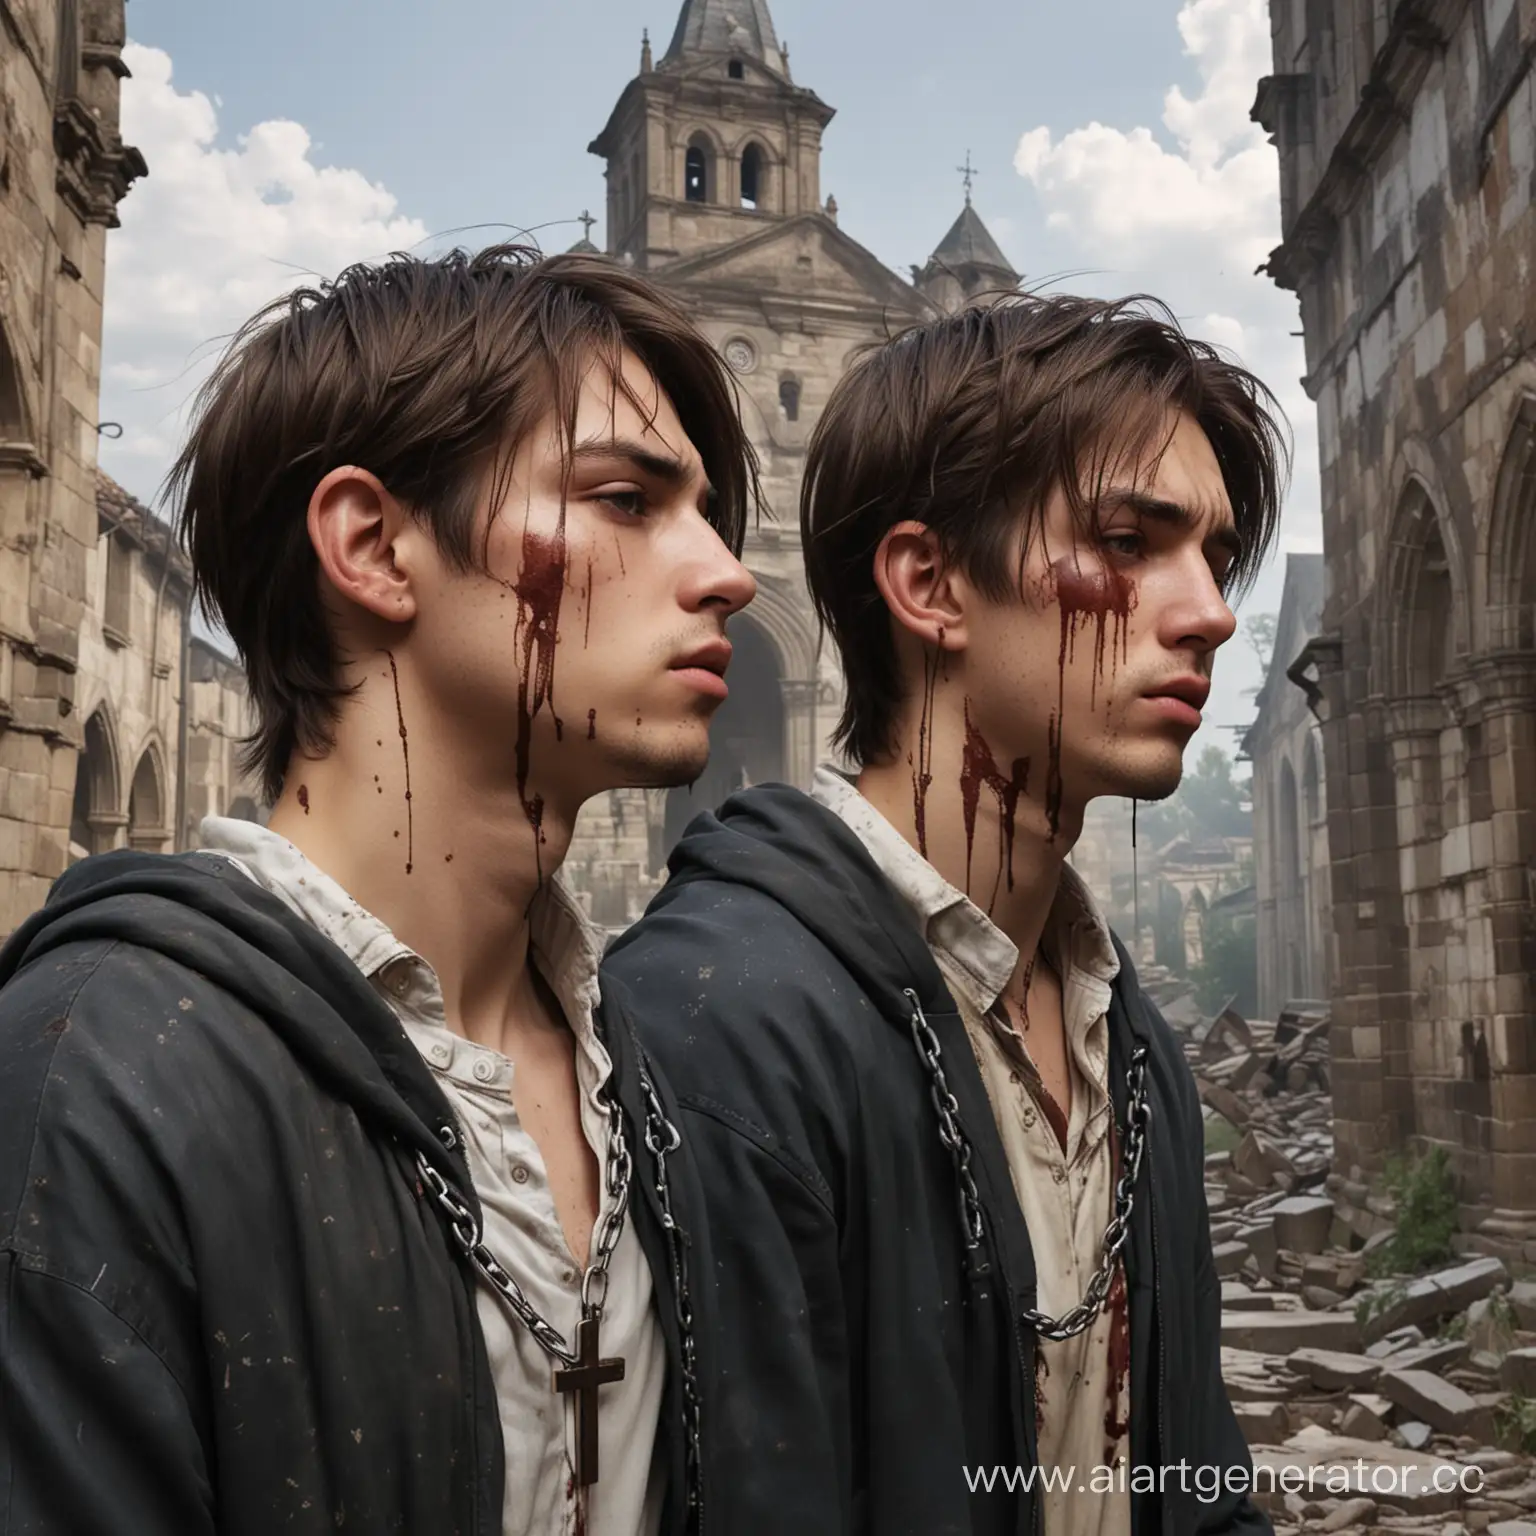 Teenage-Boys-with-Wounded-Faces-Praying-in-Ruined-Church-Anime-Style